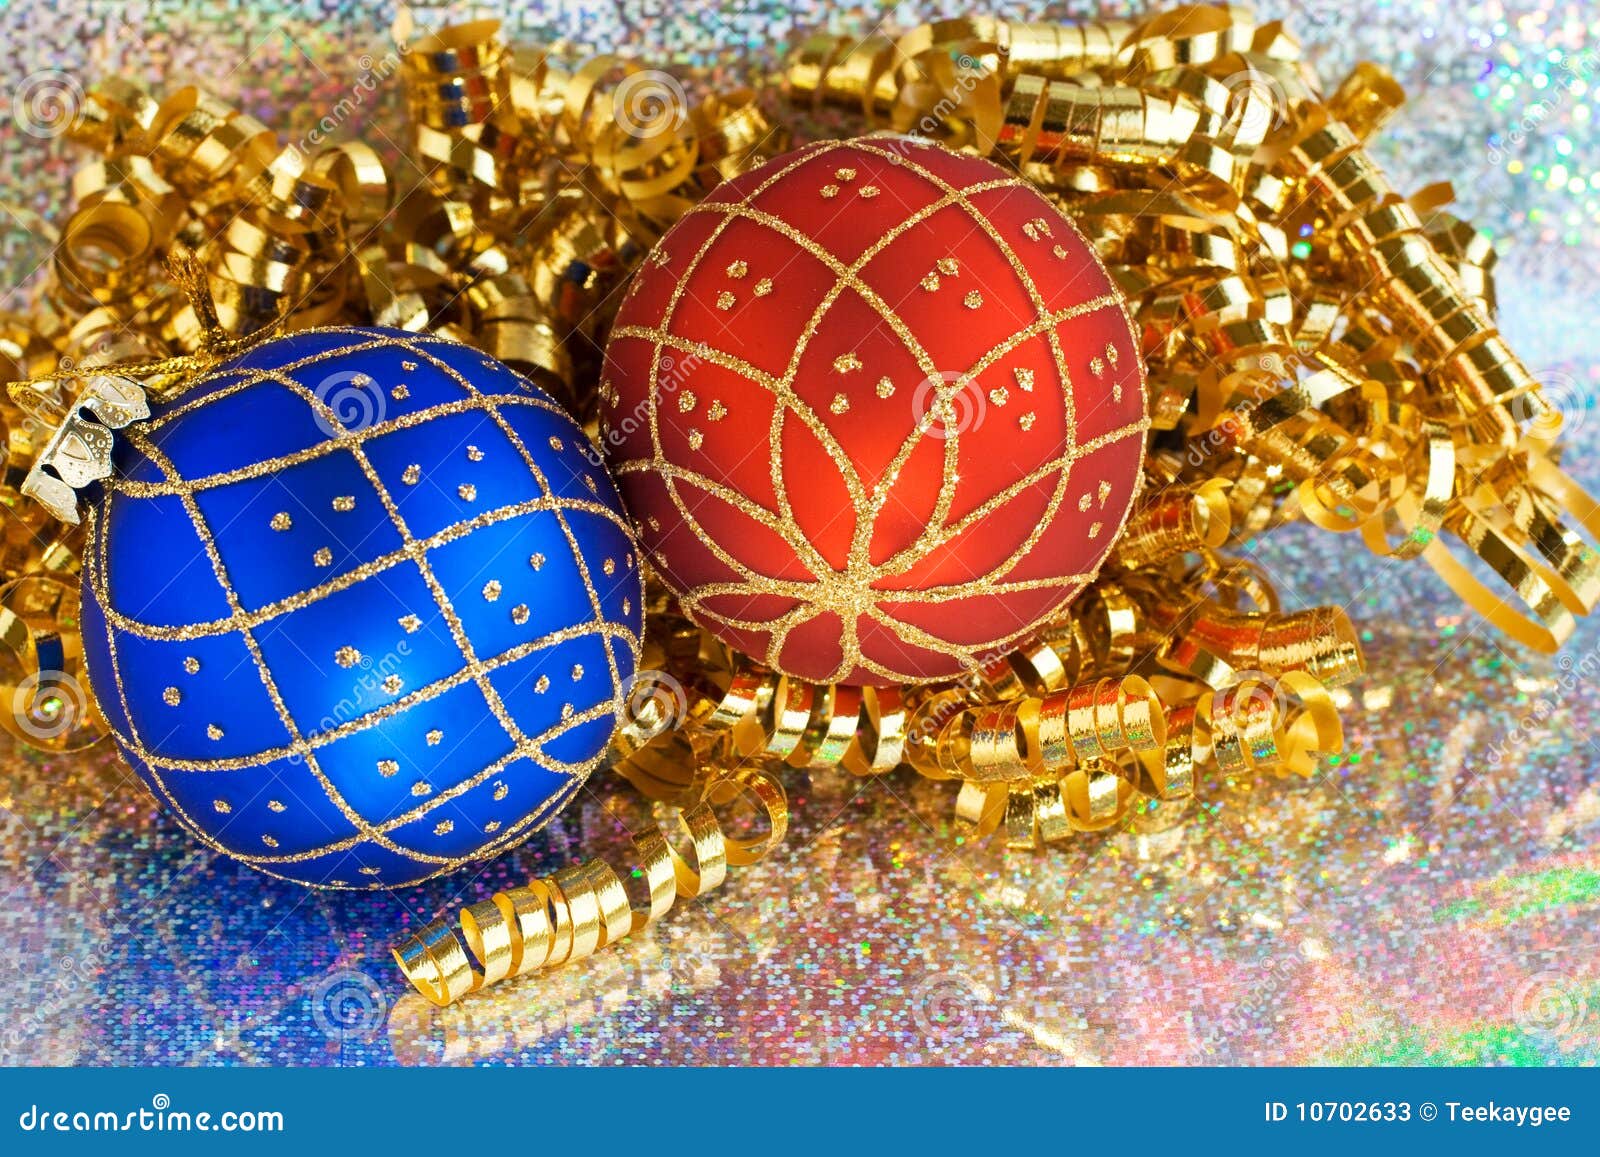 Christmas ornaments stock image. Image of copy, decoration - 10702633